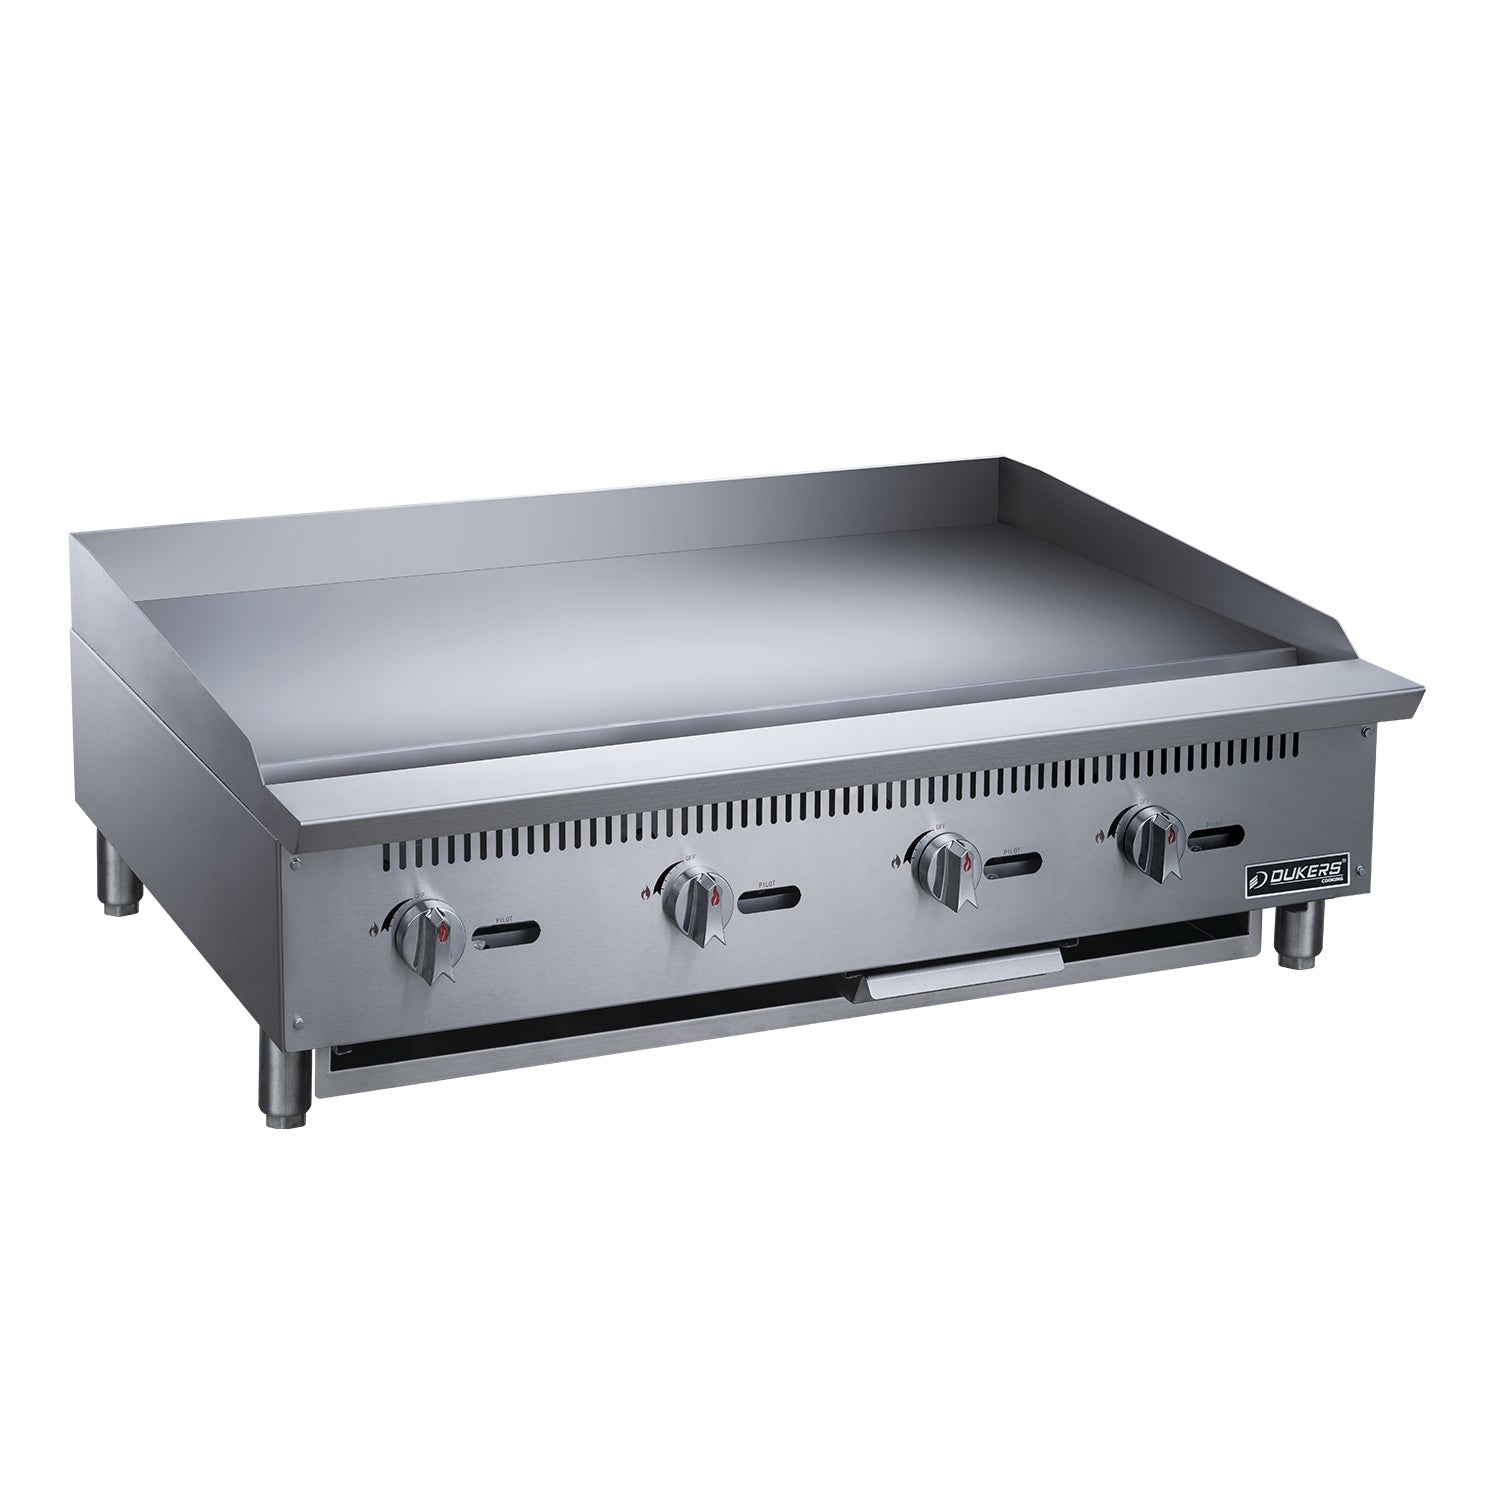 48" Griddler (24" Depth) 4-Burner Commercial Griddle in Stainless Steel with 4 legs commercial flat top griddle with three control knobs and a manufacturer's logo on the front, designed for use as a natural gas griddle.